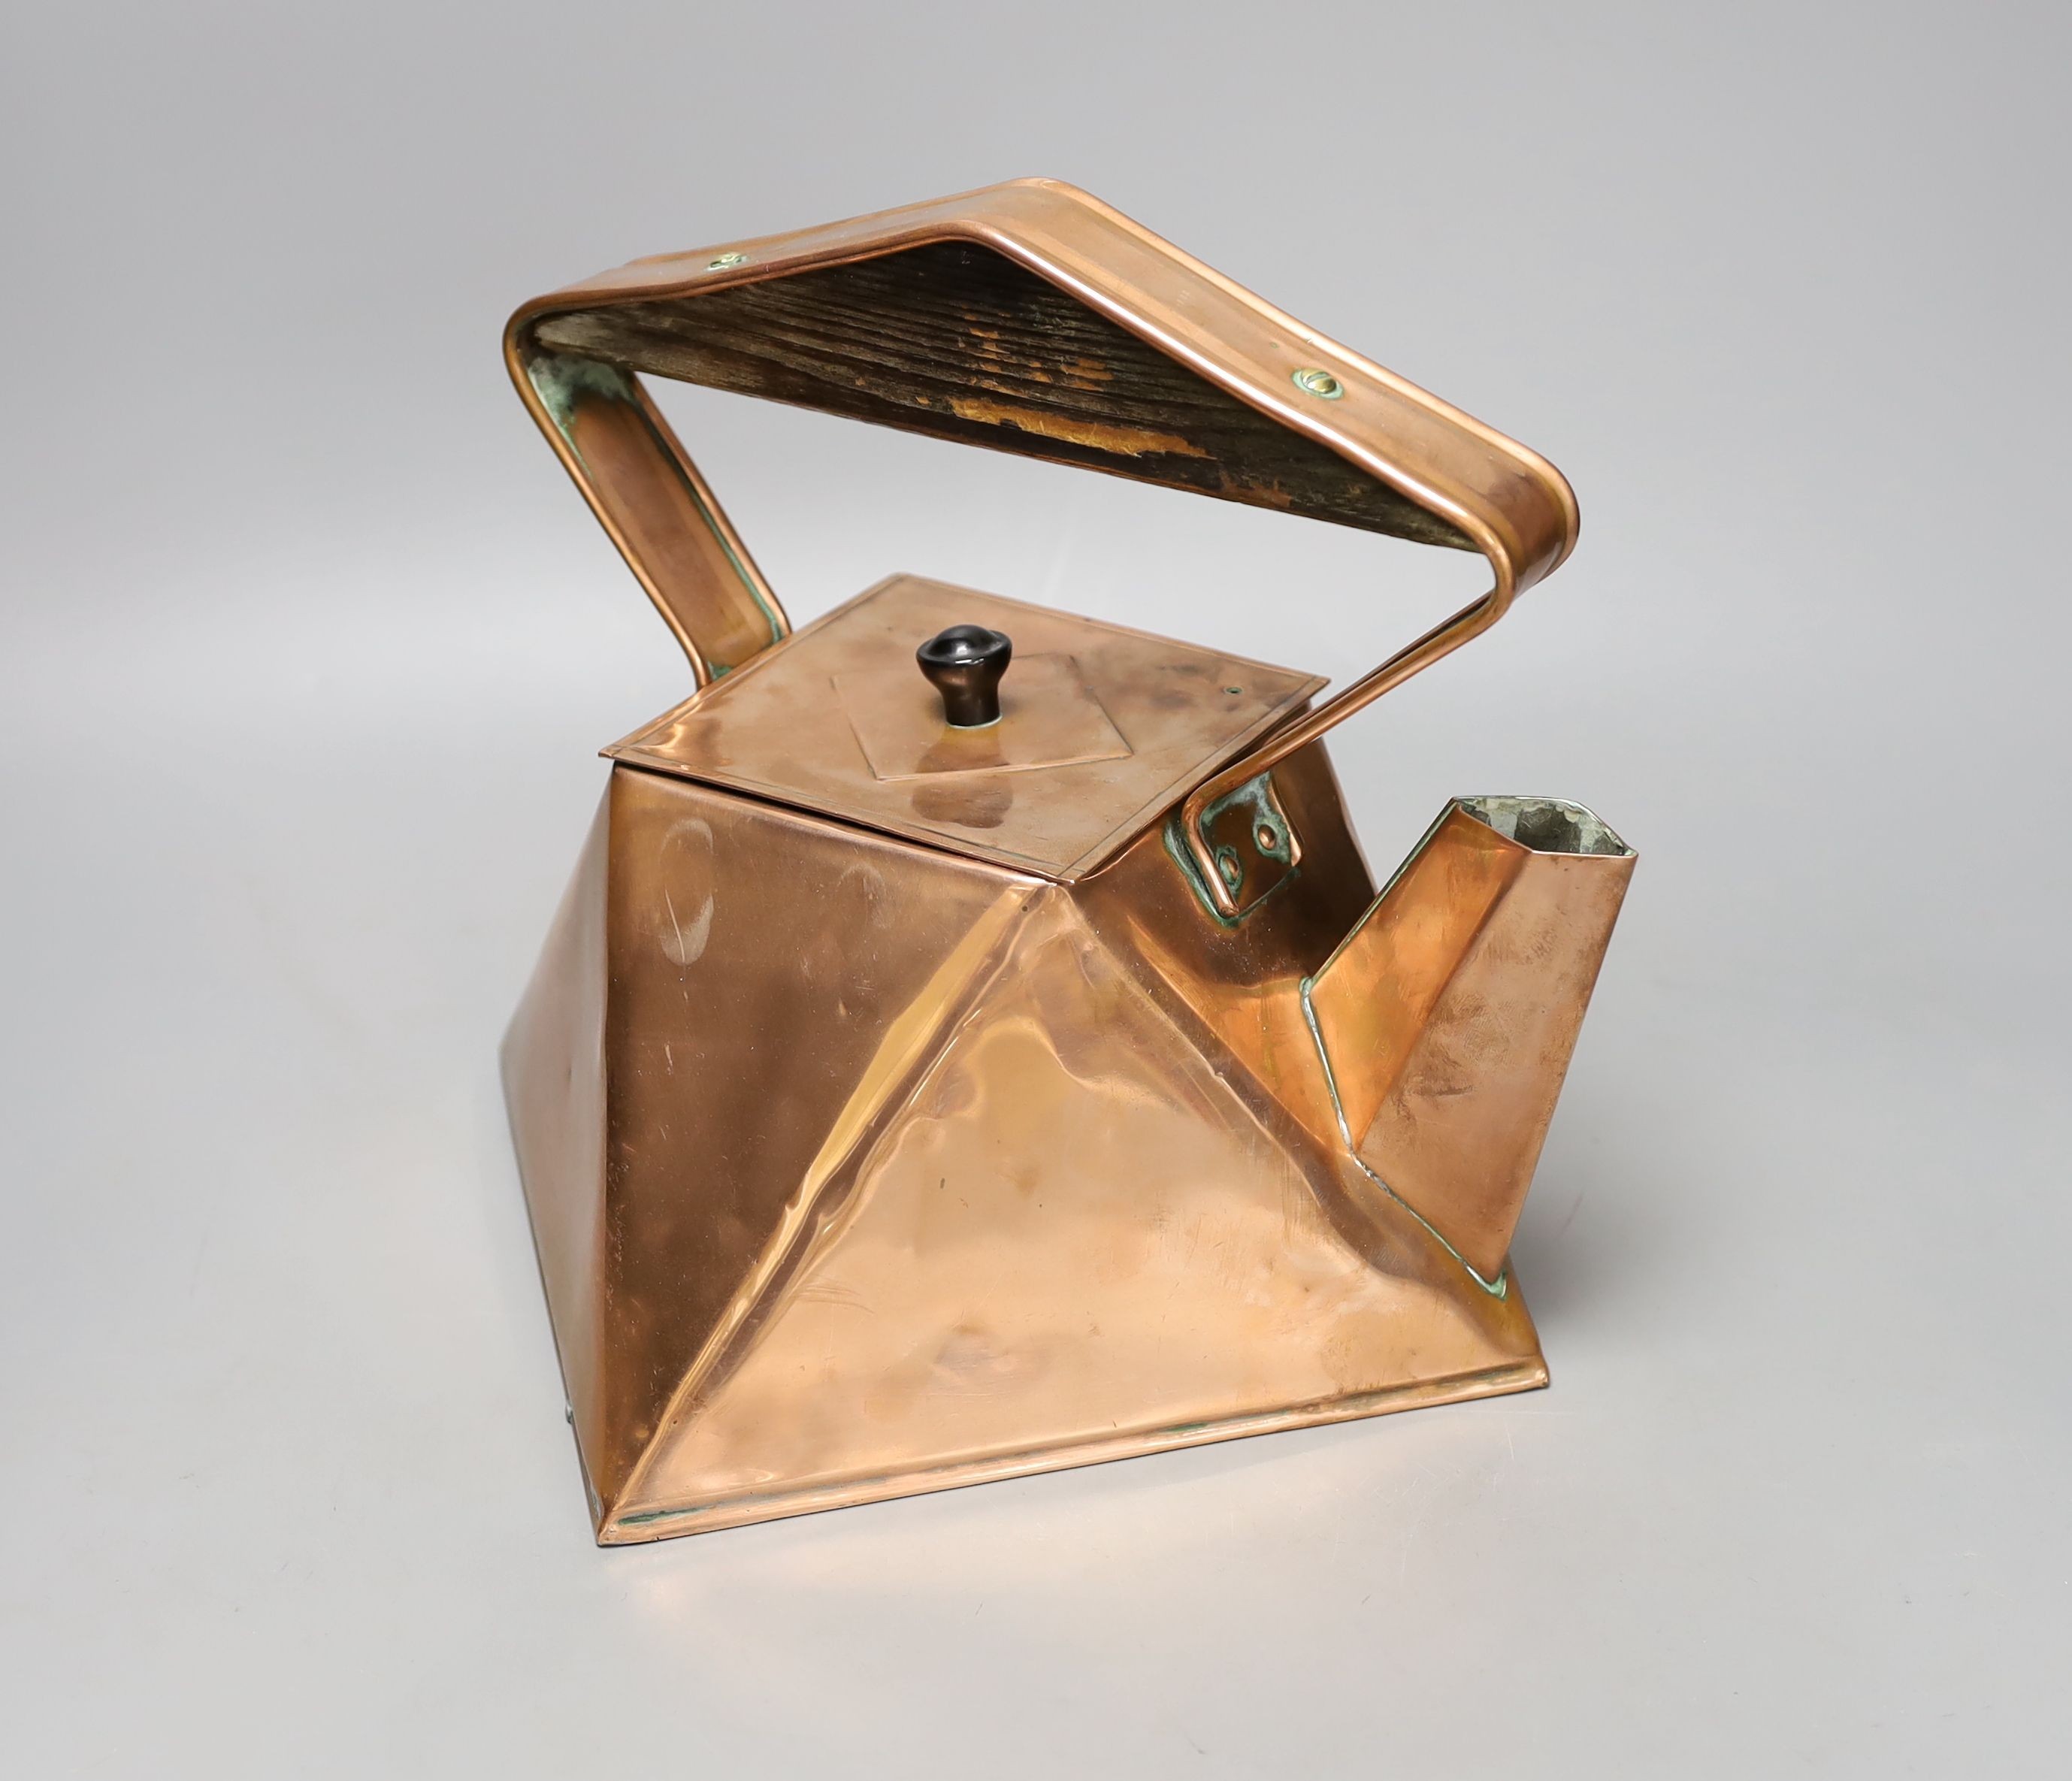 An Arts & Crafts geometric copper kettle, 23cm high, *This lot is being sold in aid of the charity Dogs Trust UK with 100% of the hammer price going to the charity